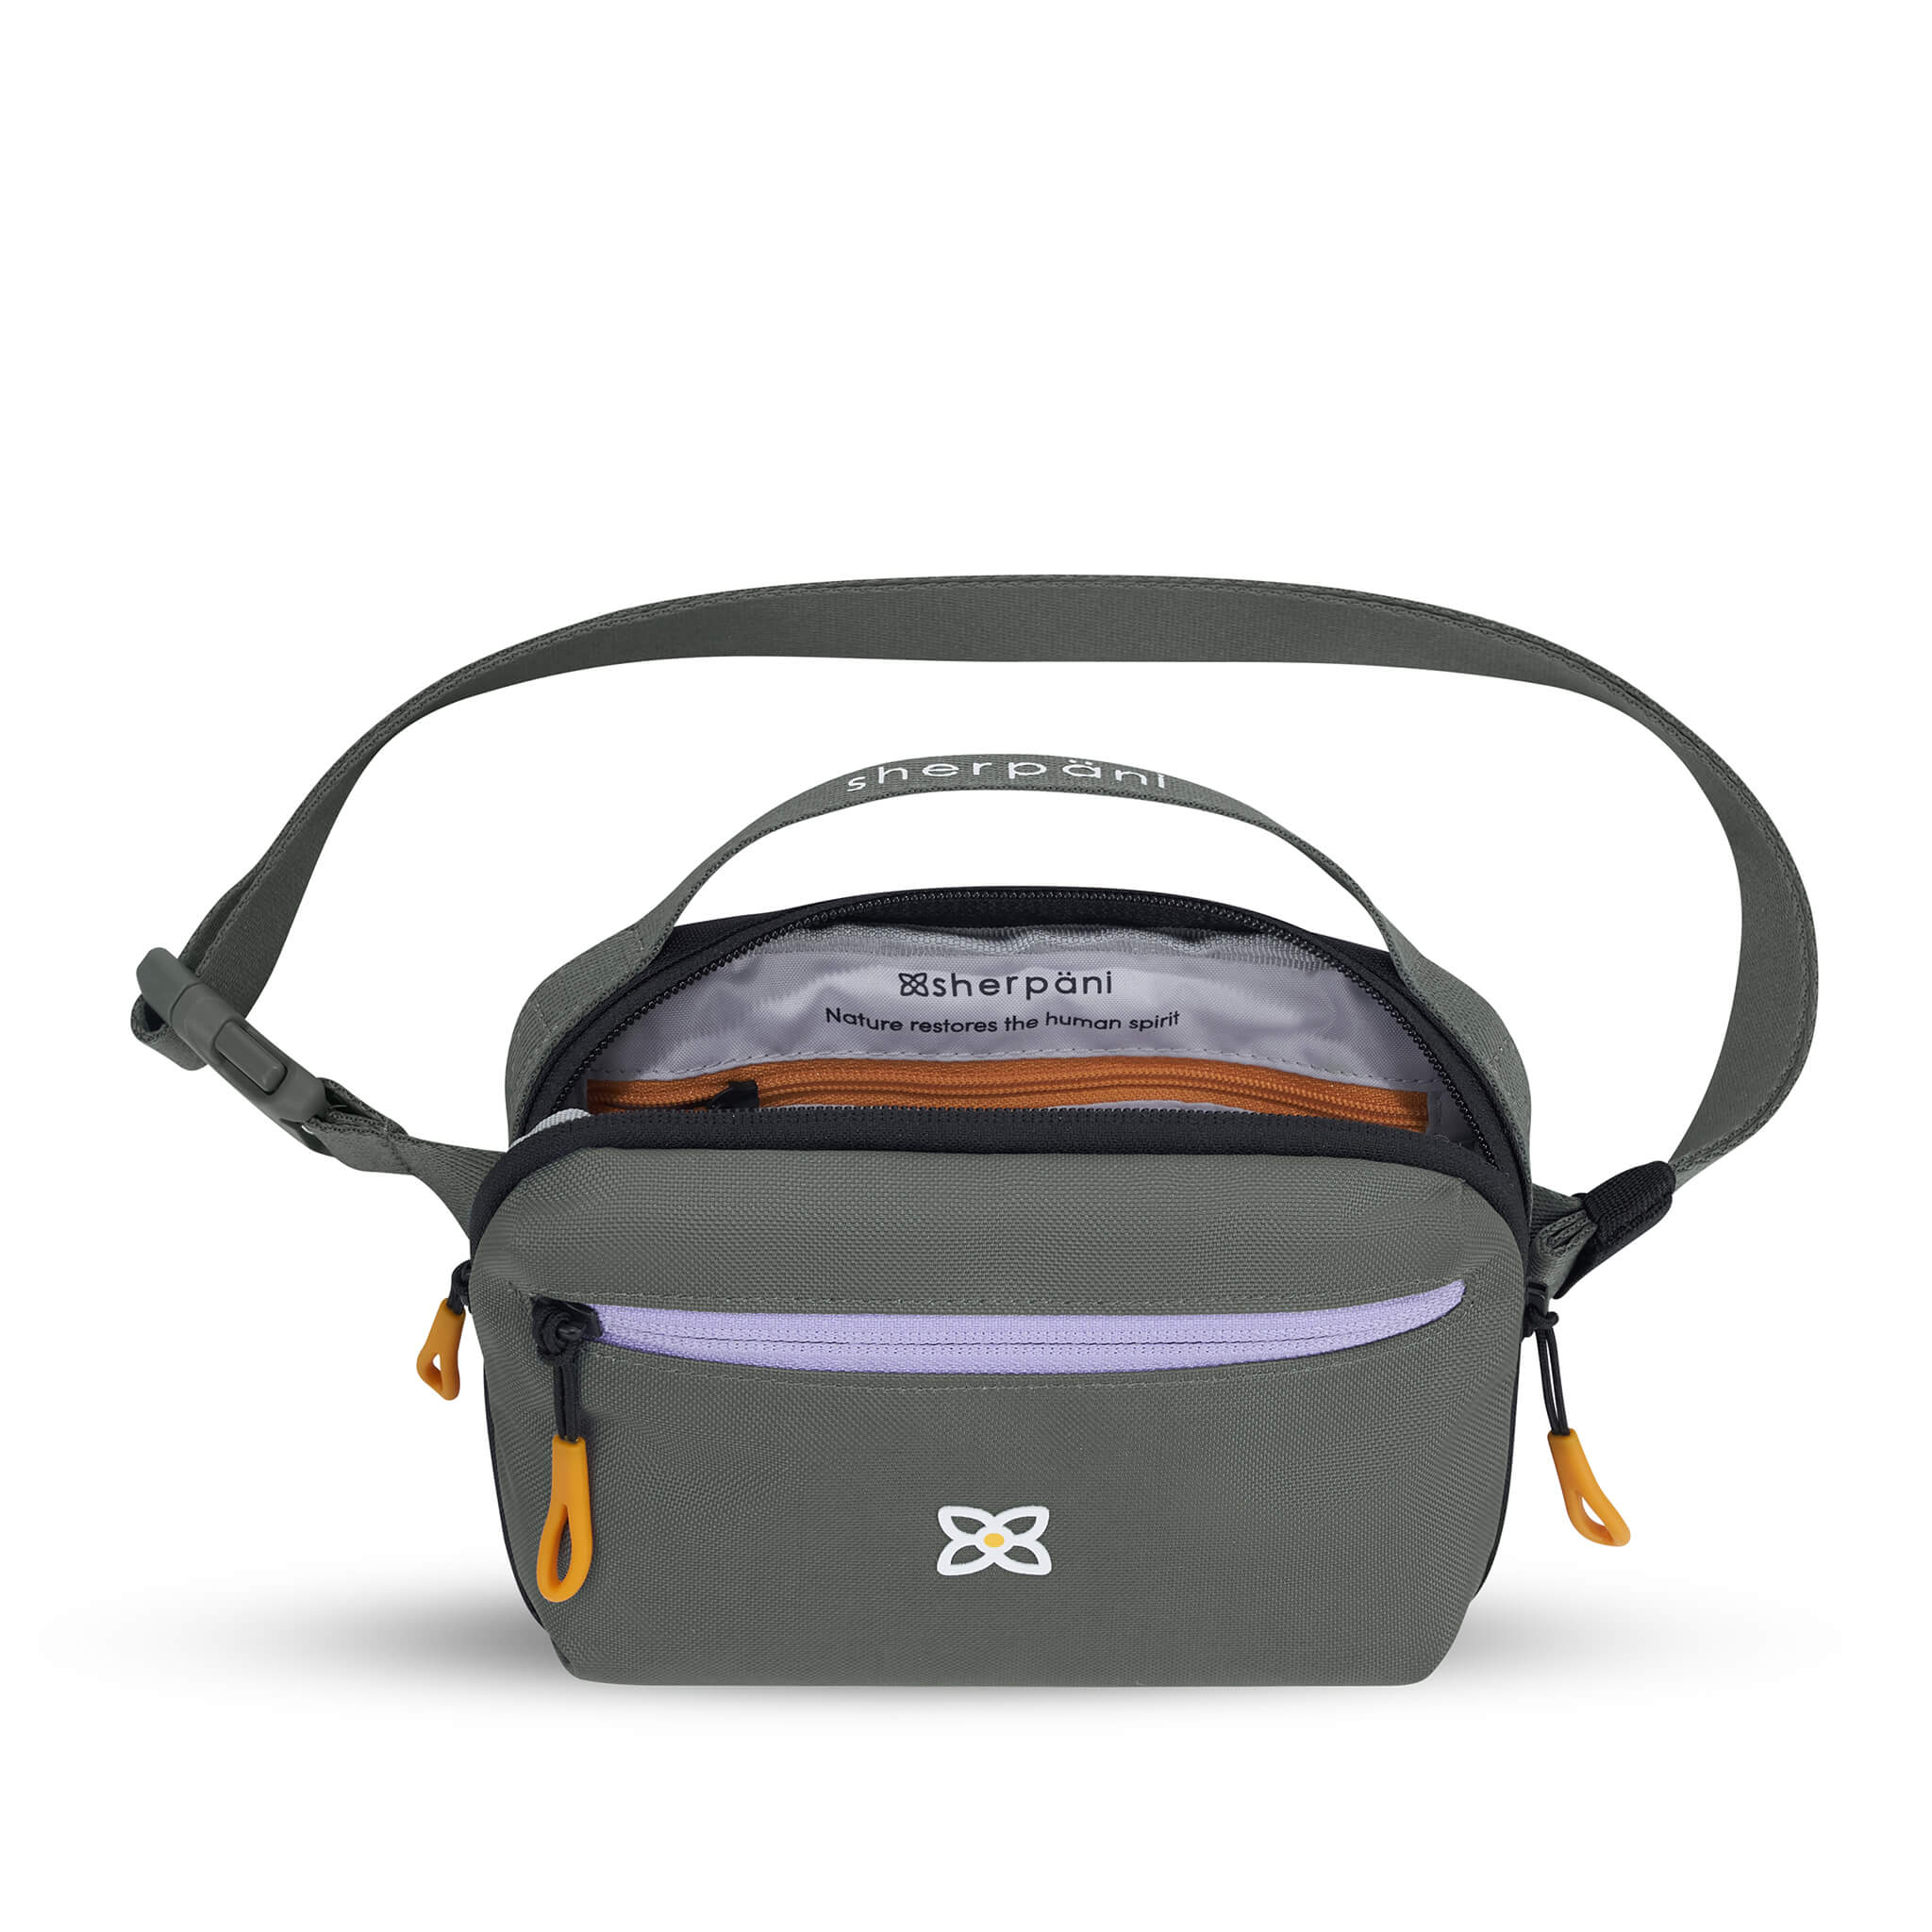 Top view of Sherpani&#39;s waist pack, the Hyk in Juniper. The main bag compartment is open to reveal a light gray interior and inside zipper pocket.